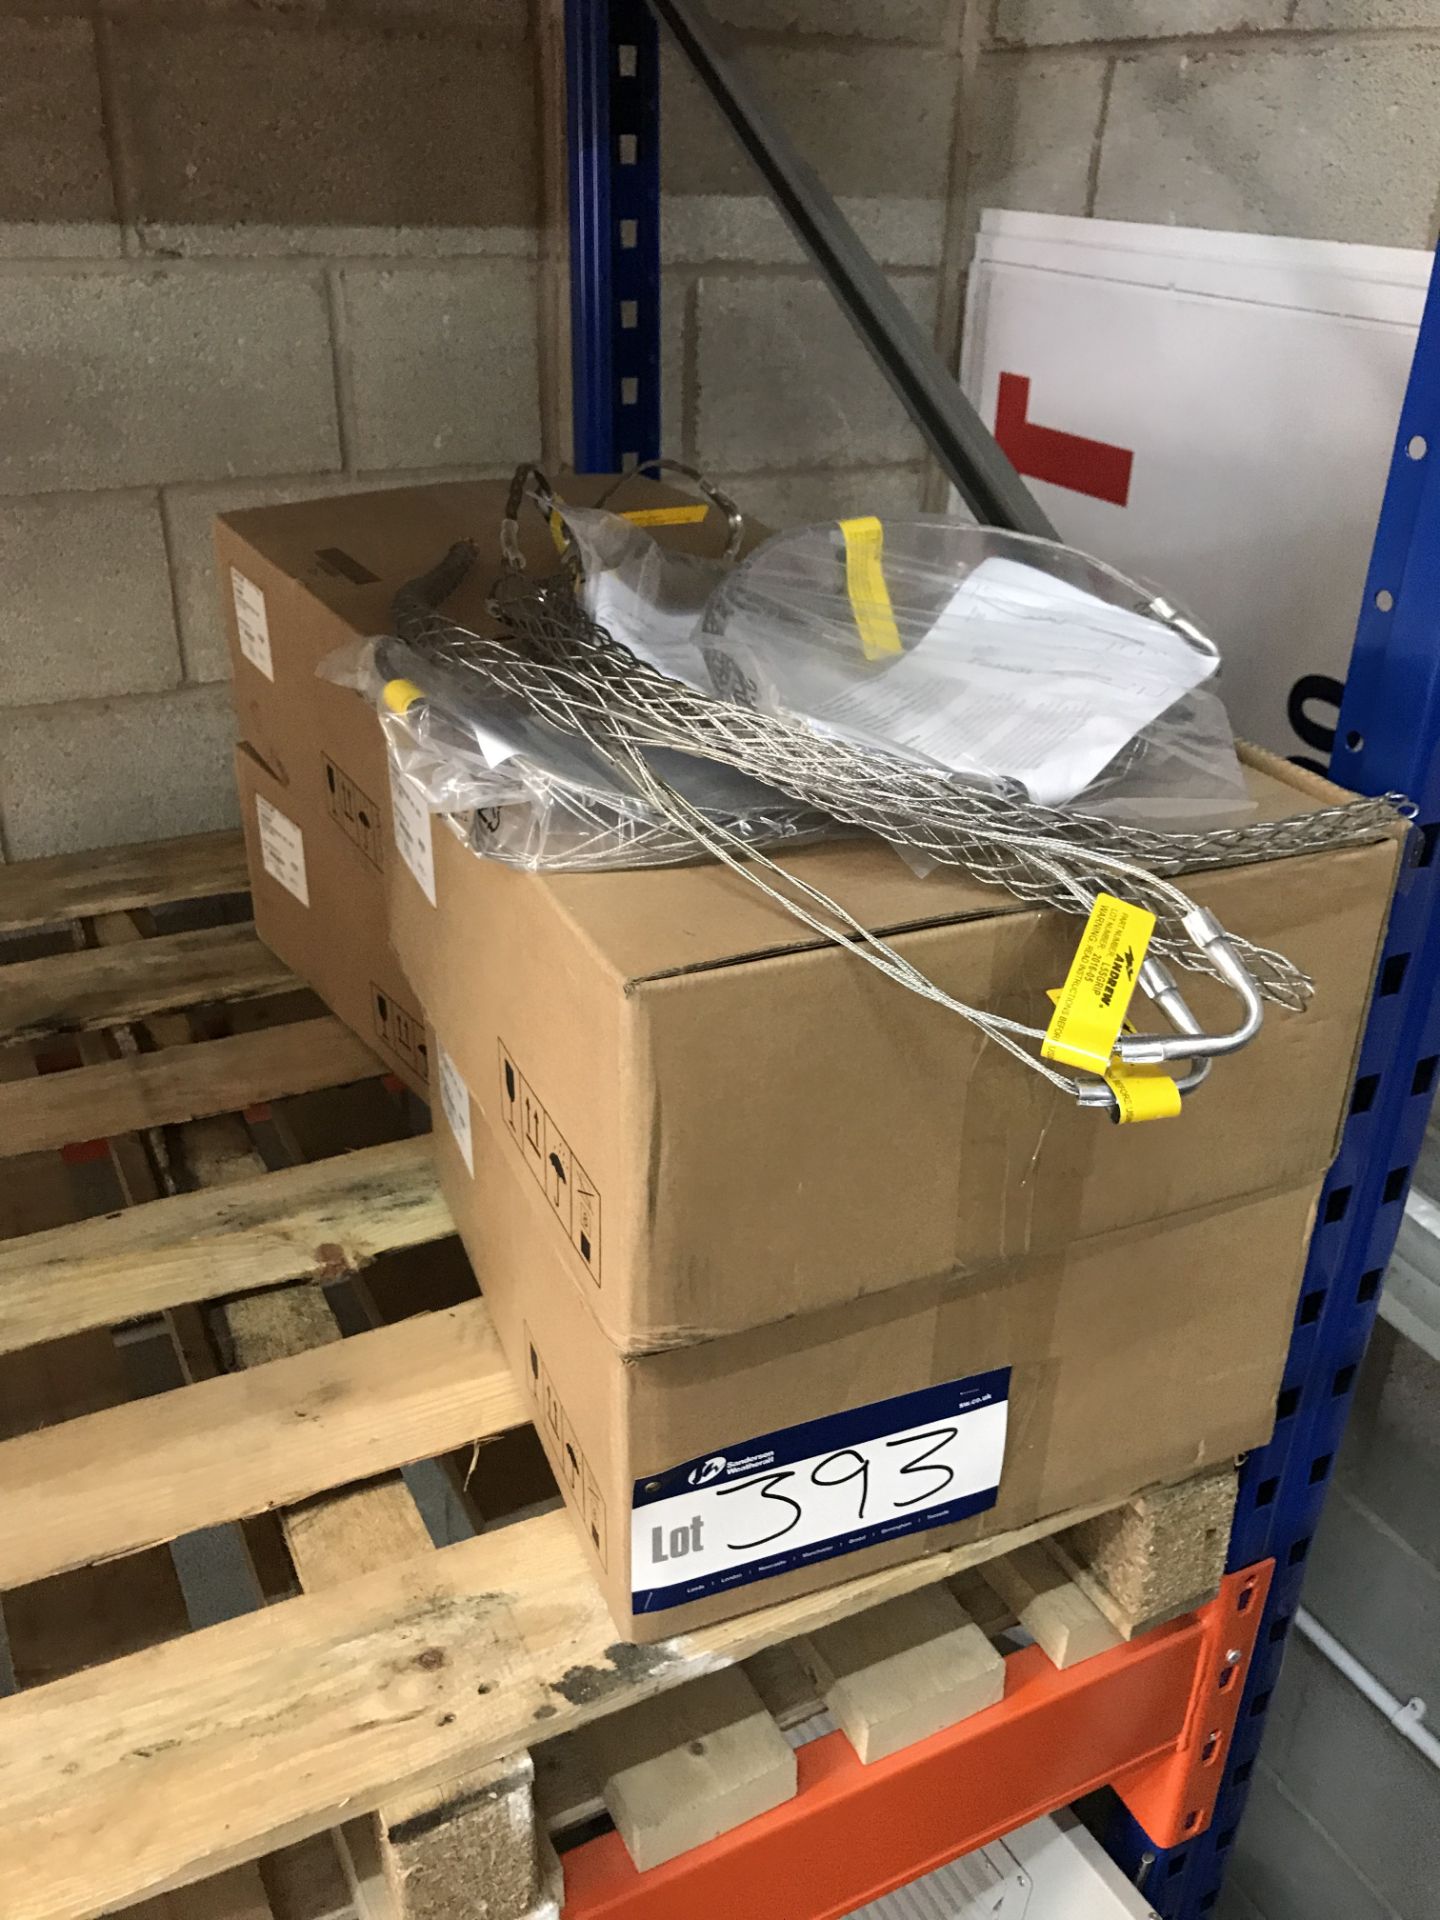 Quantity of Commscope Support Hoisting Grip, Model L5S Grip in 4 boxes